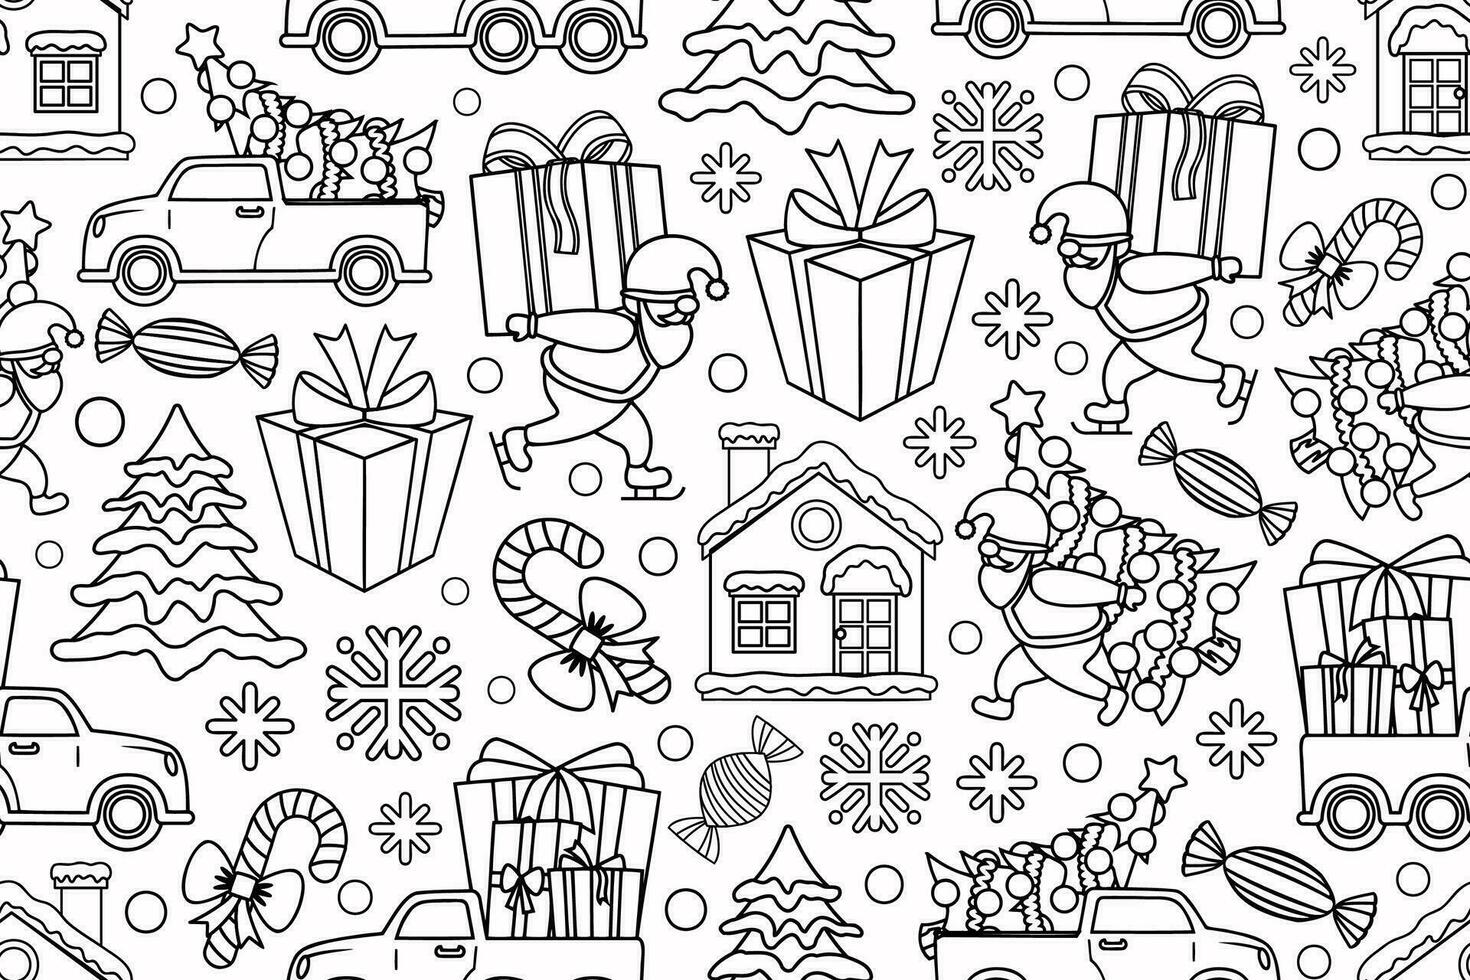 Seamless line art Christmas pattern with Santa, cars carrying gifts and decorated Christmas trees, presents, snow covered houses and firs. vector